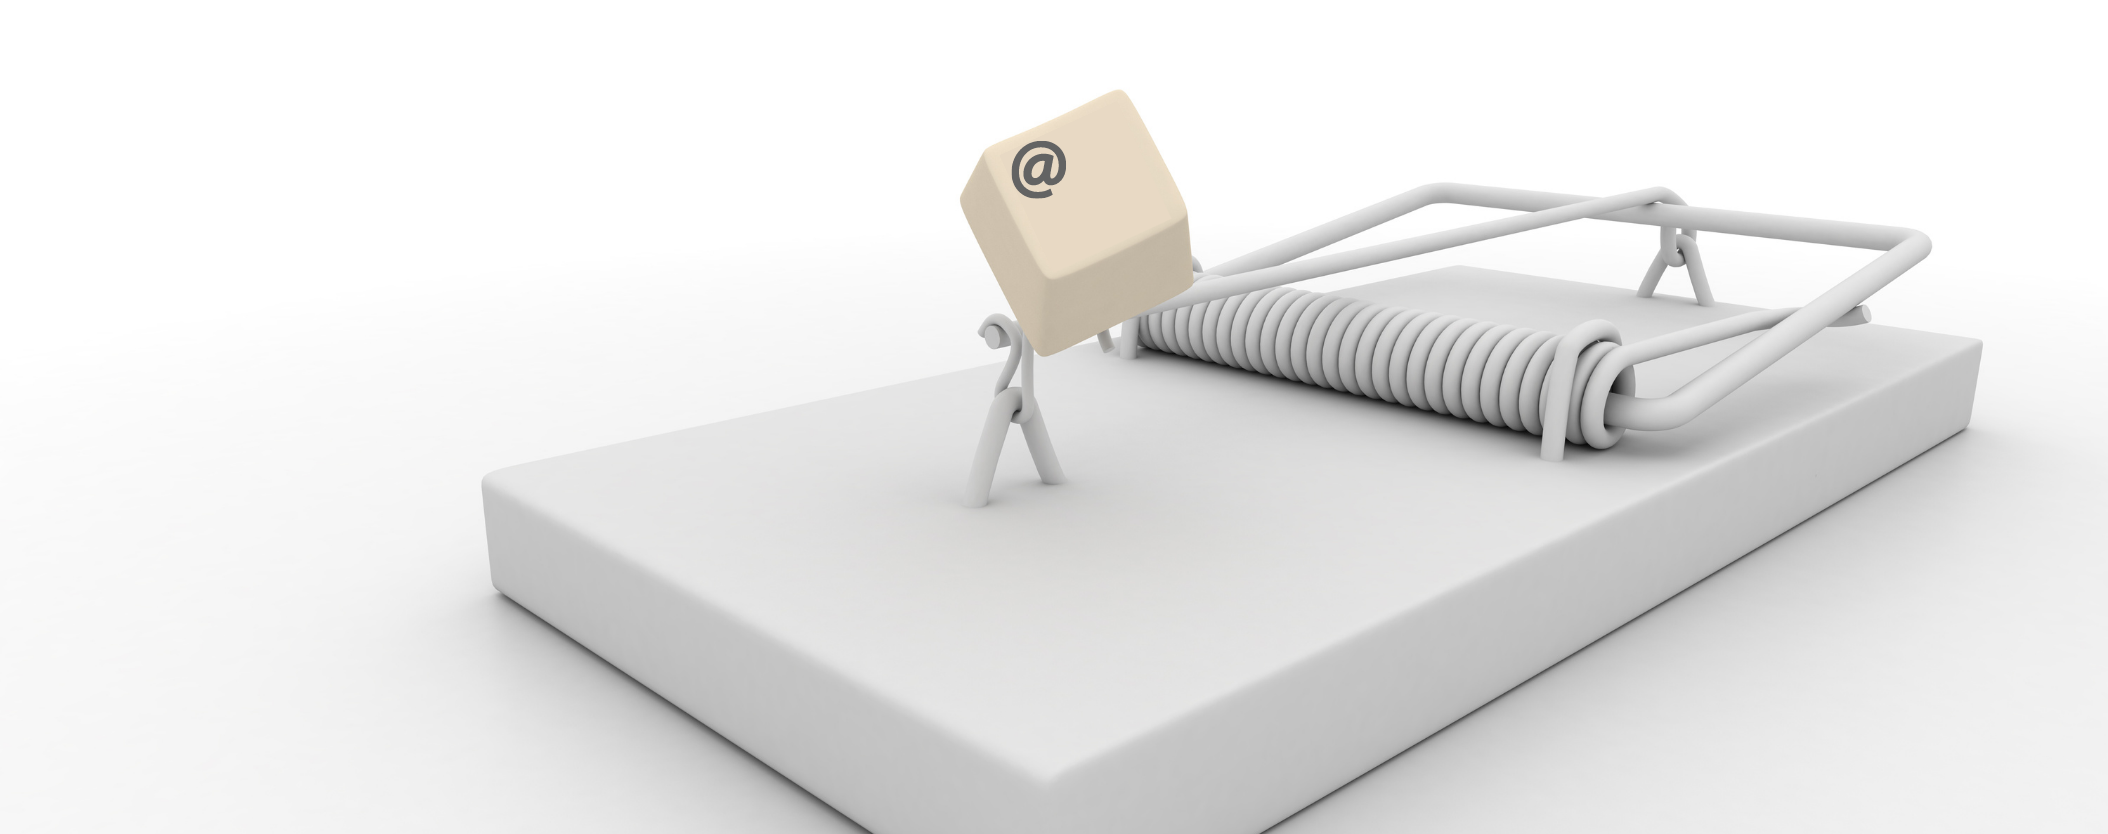 An image of a mouse trap with the @ key to represent a spam trap 